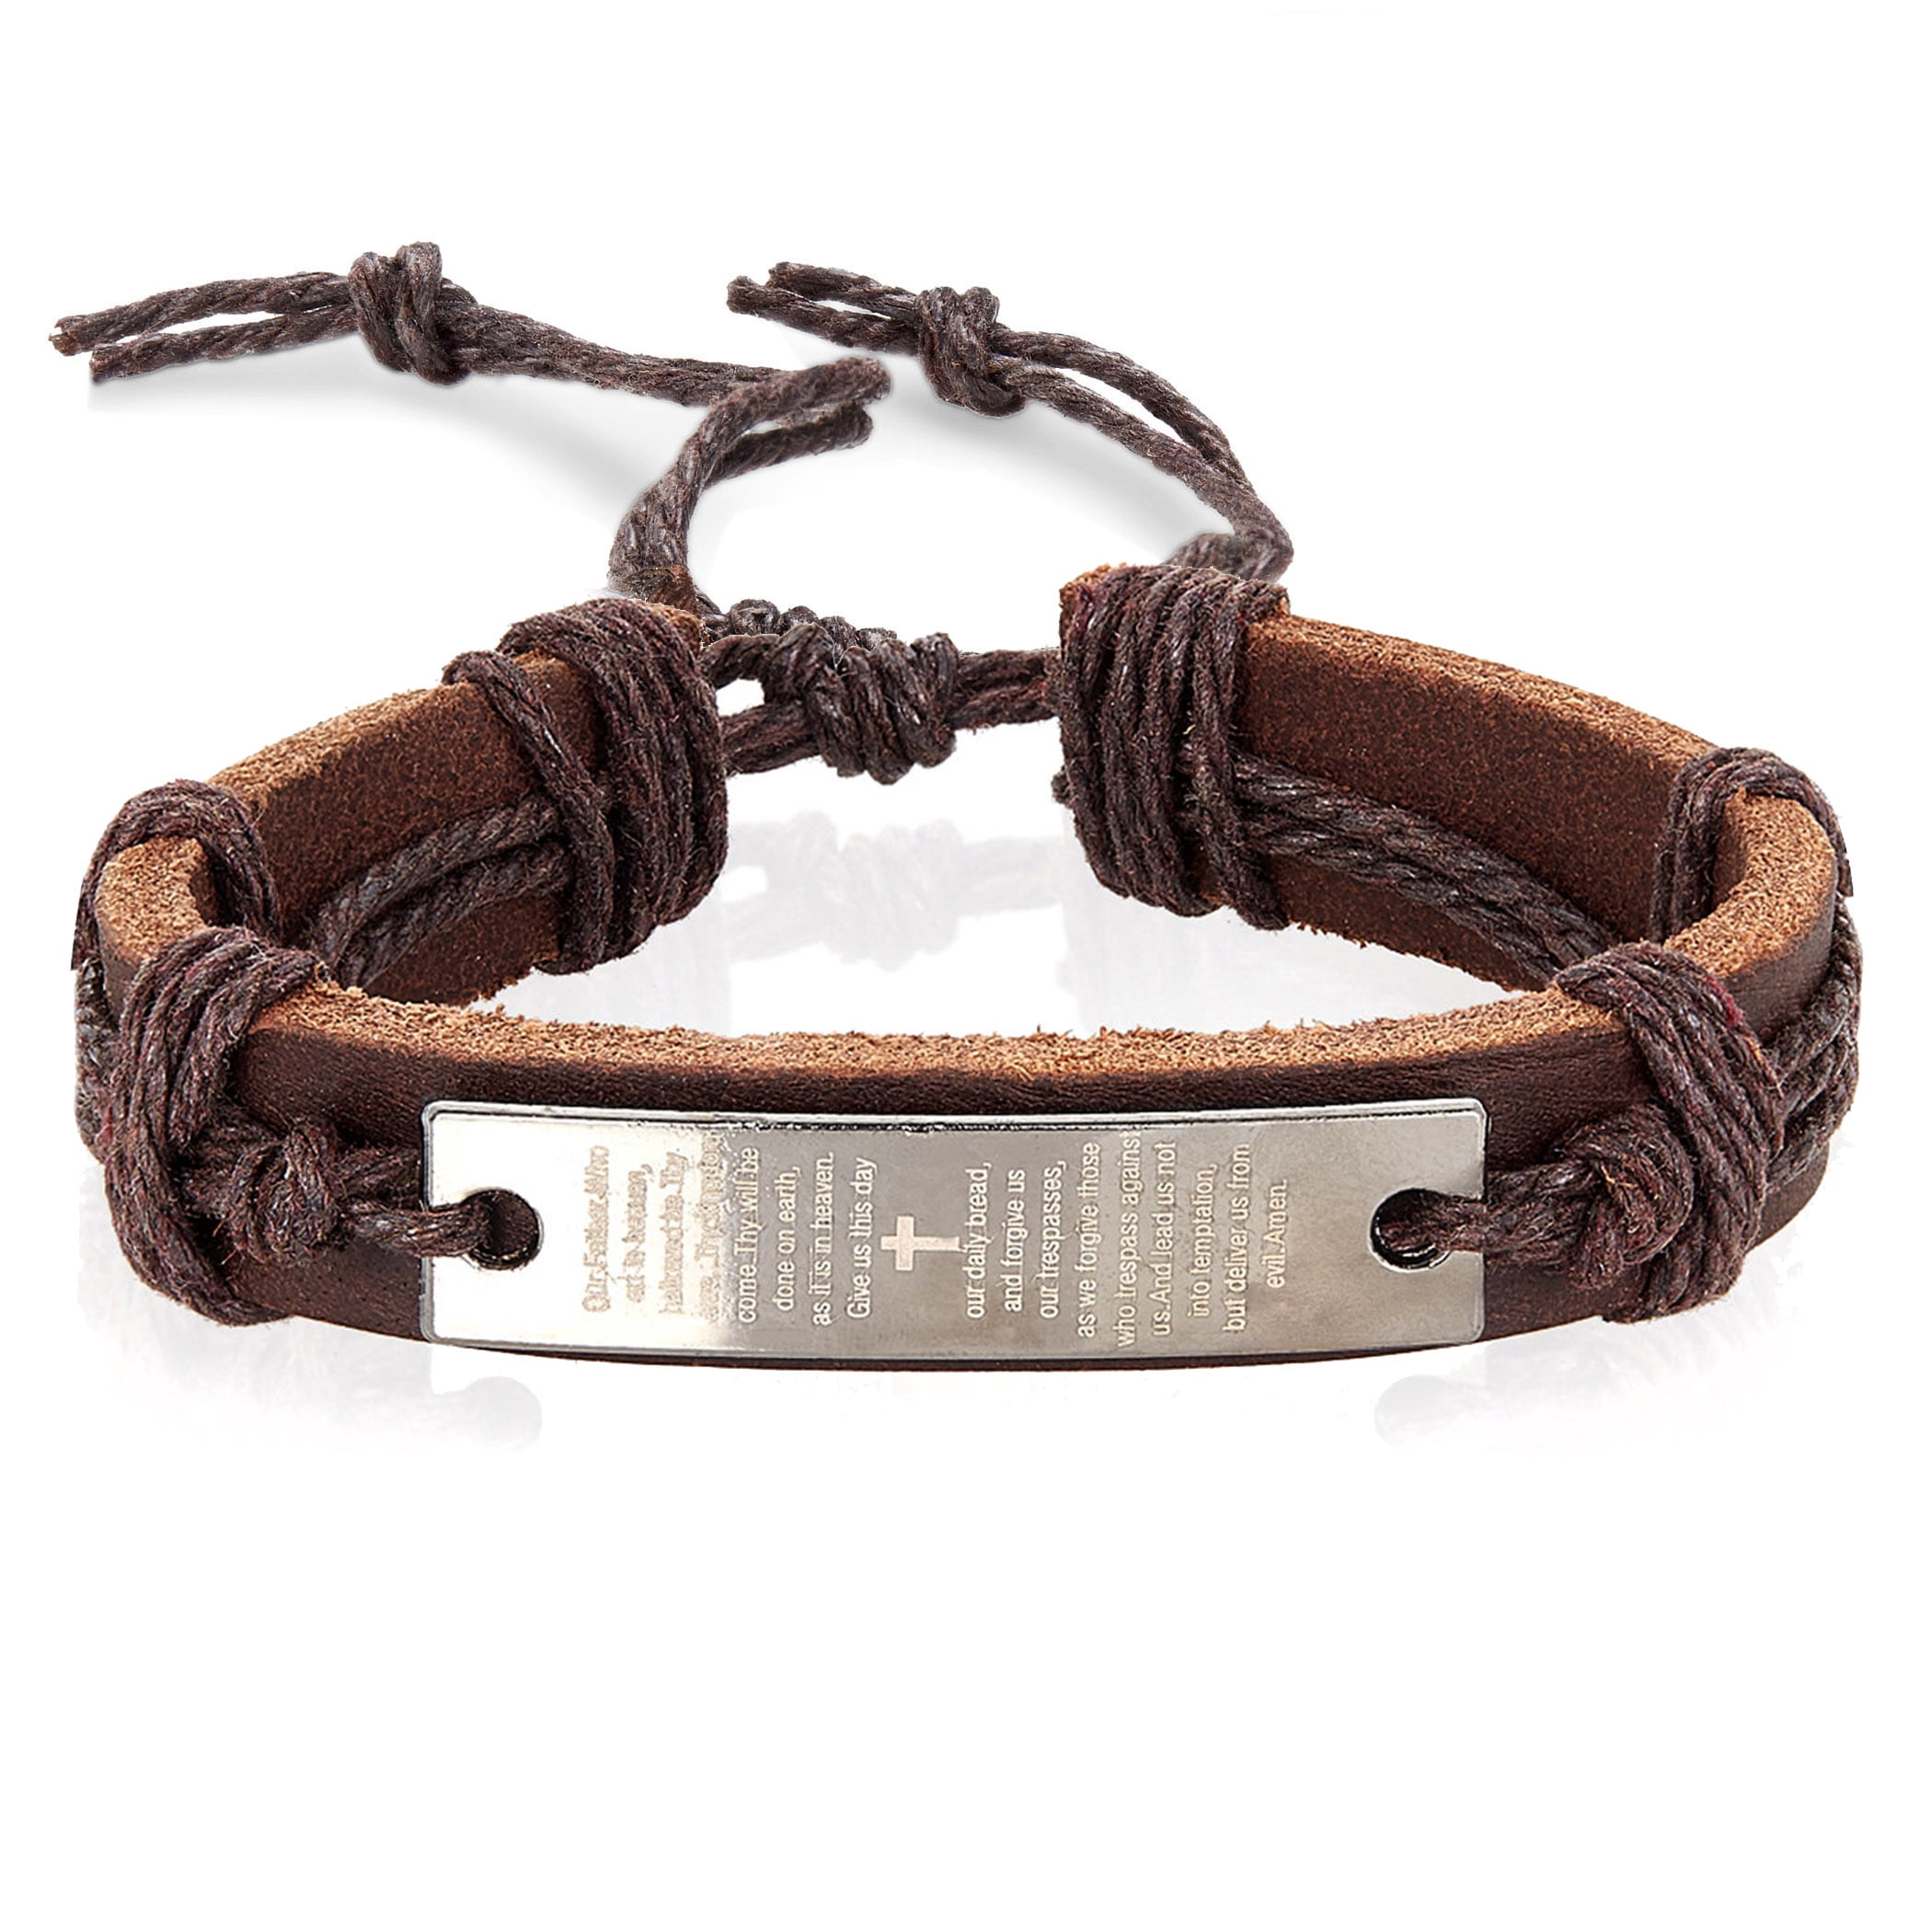 Simply Cool Single Band Real Leather Bracelet Wristband Men's Cuff LIGHT BROWN 